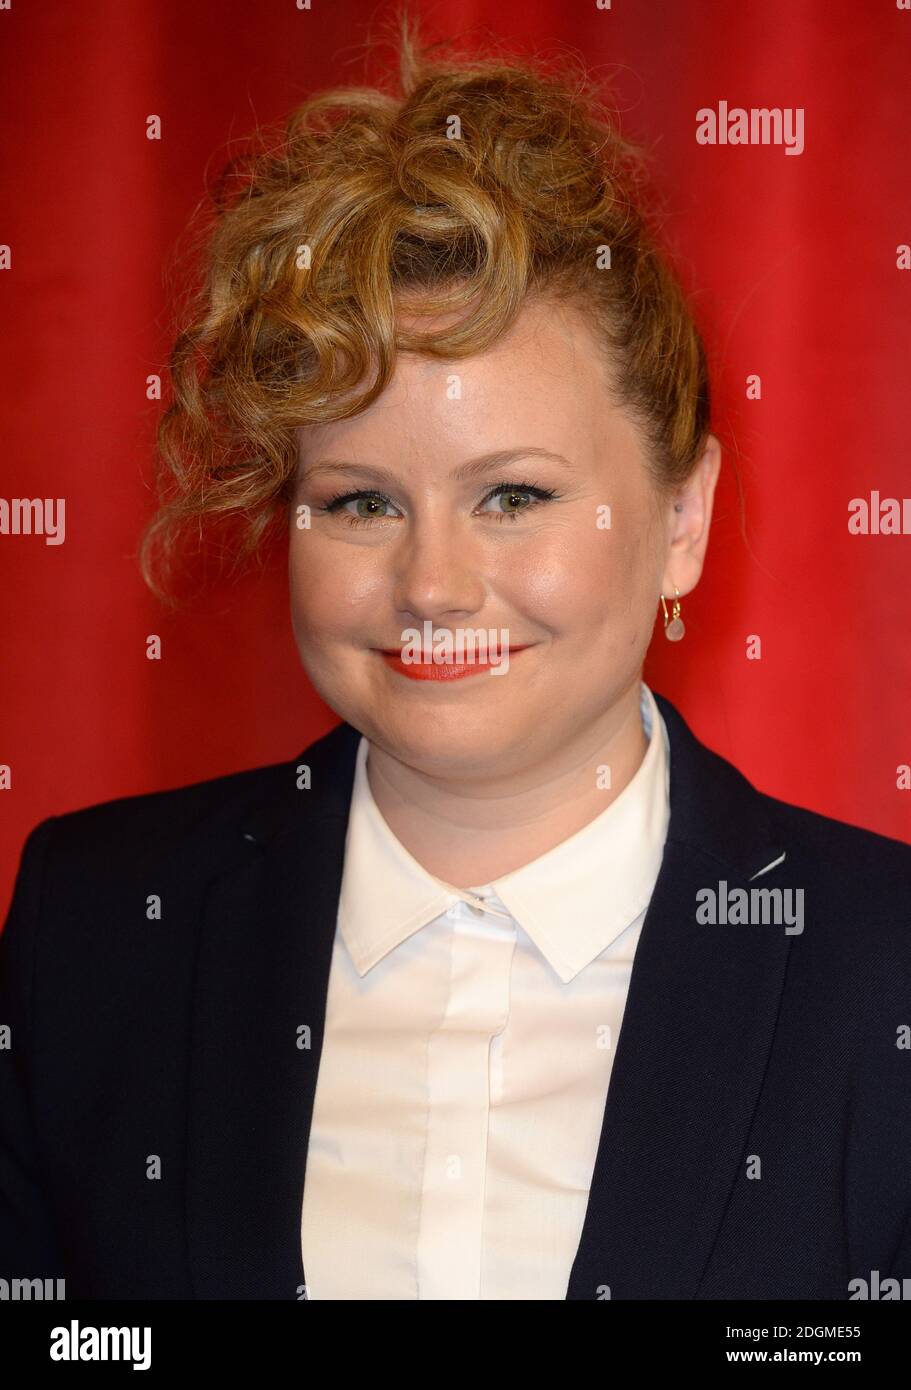 Dolly-Rose Campbell attending the British Soap Awards 2016 at the Hackney Empire, 291 Mare St, London. (Mandatory credit: Doug Peters/EMPICS Entertainment)   Stock Photo